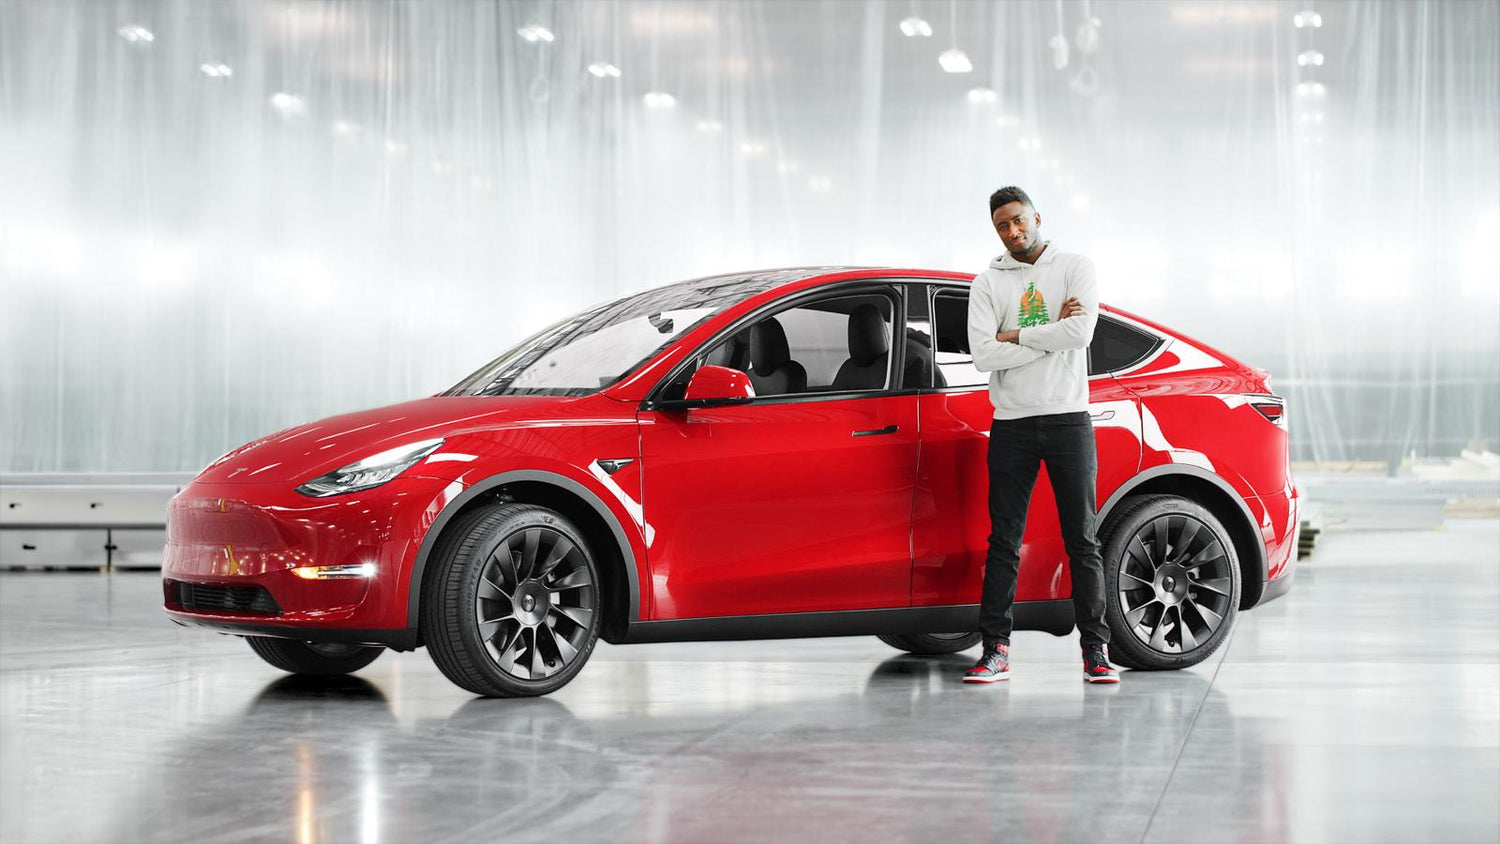 Tesla Model Y Review By Marques Brownlee, Explains Why It's The Most I